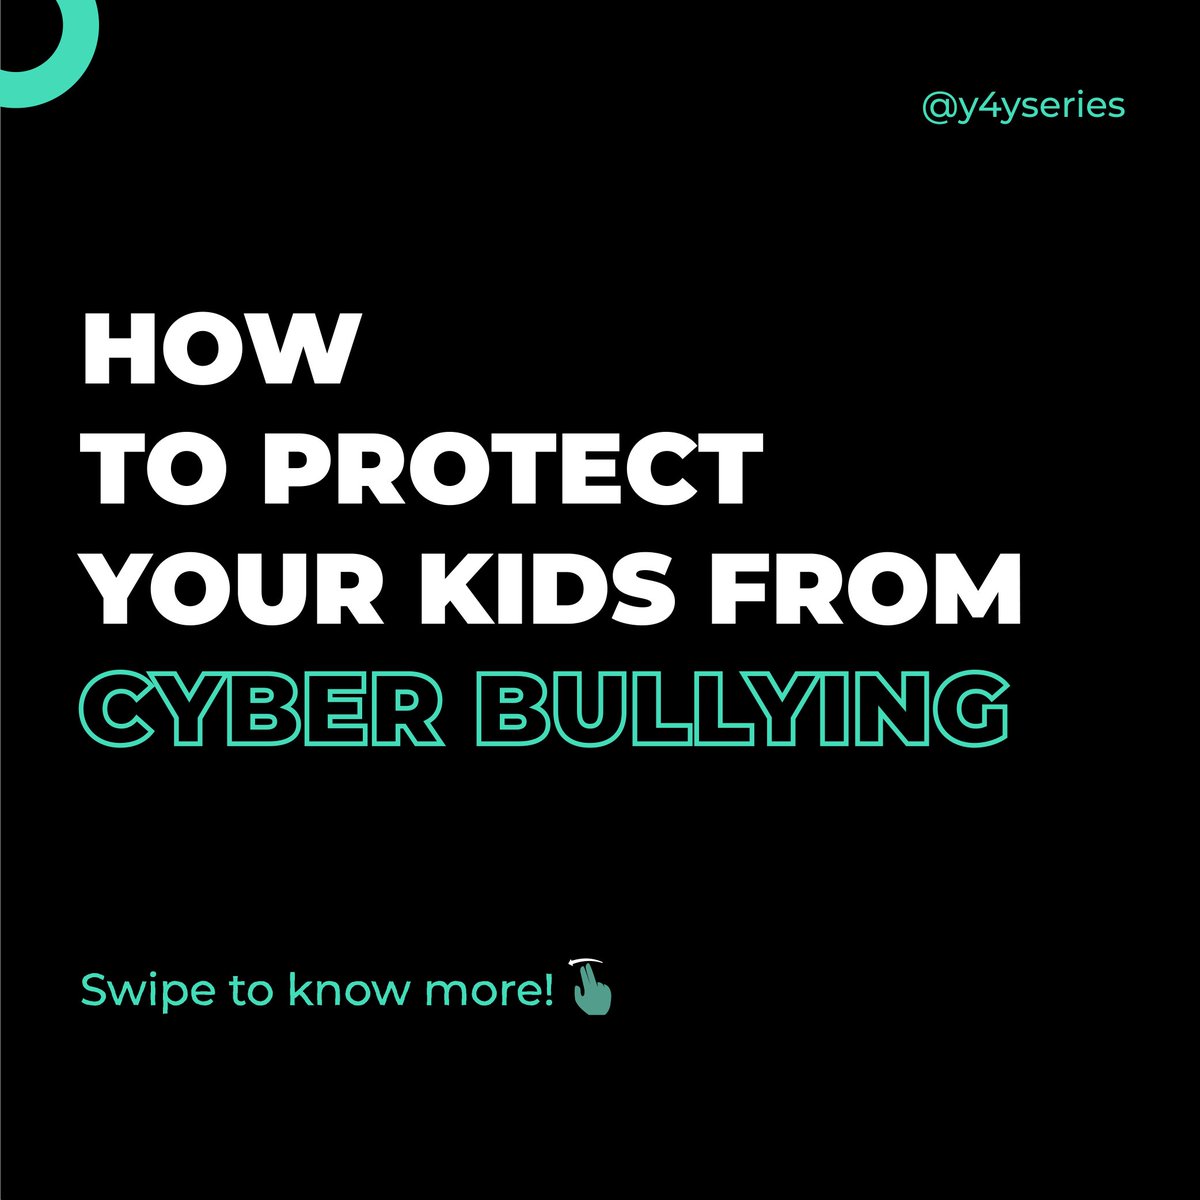 Many kids are spending massive amount of time online to learn new things during this period. This has exposed so many to various forms cyberbullying. How do parents protect their kids from online bullies?